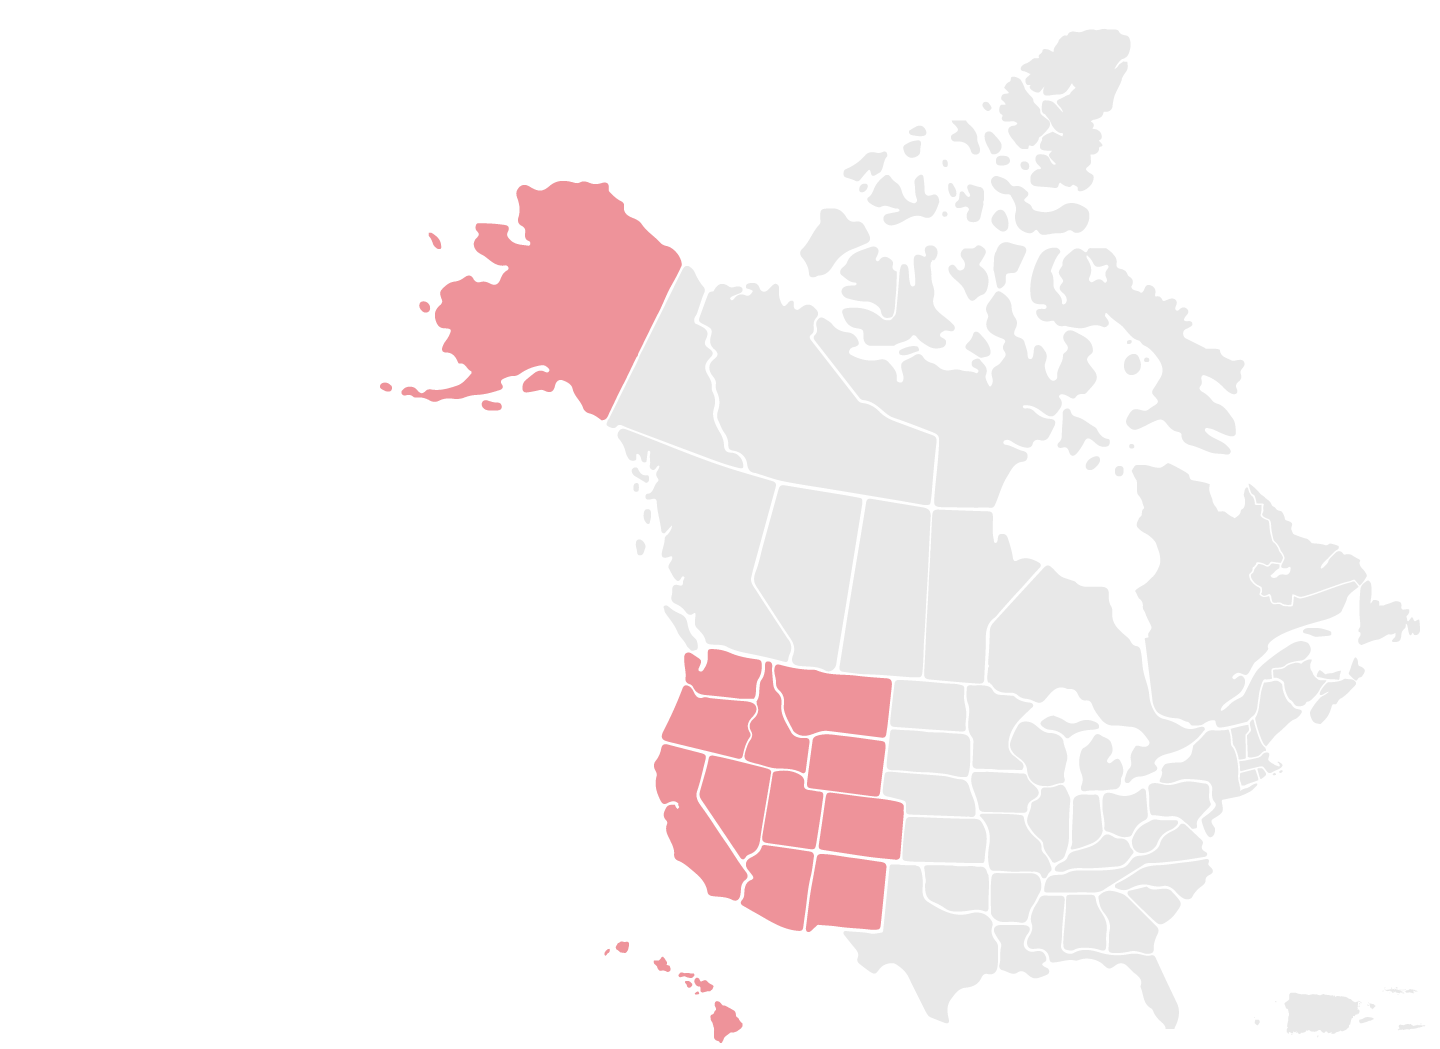 US and Canada map with the western US states highlighted in red